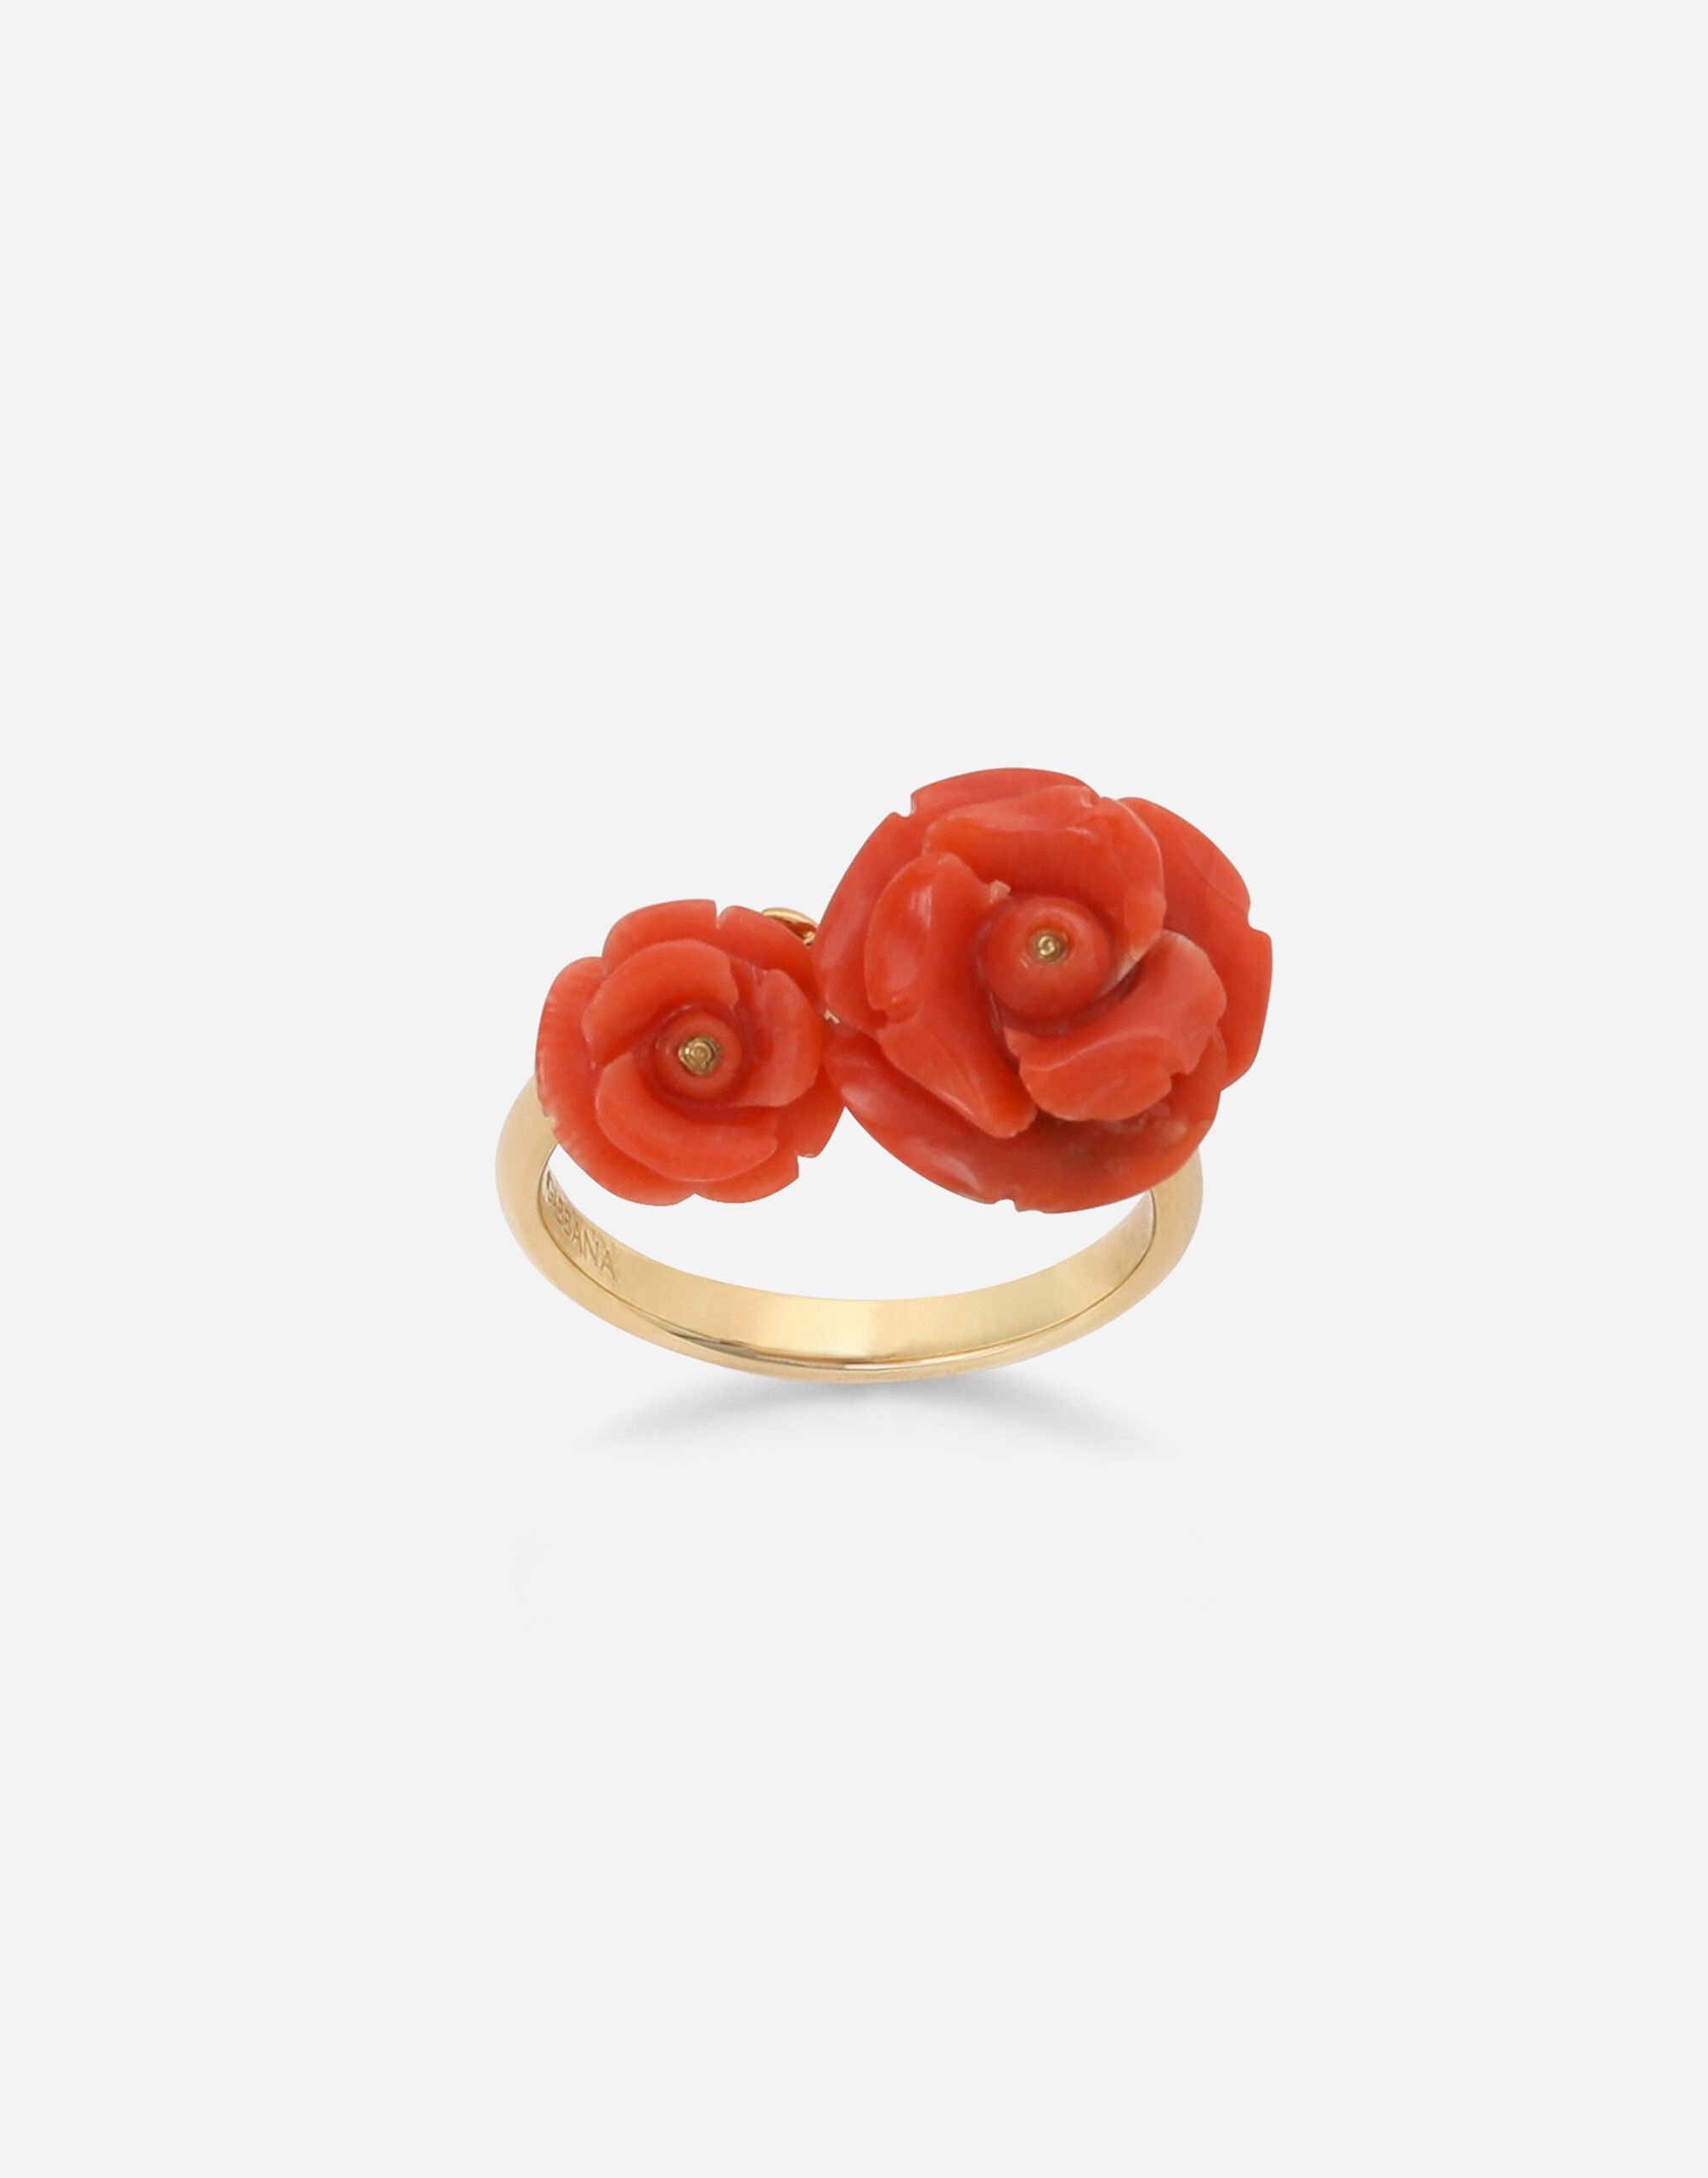 Ring Red Coral Natural Stone 18k Gold Yellow Coral Sea Size 5 Italy Jewelry  | eBay